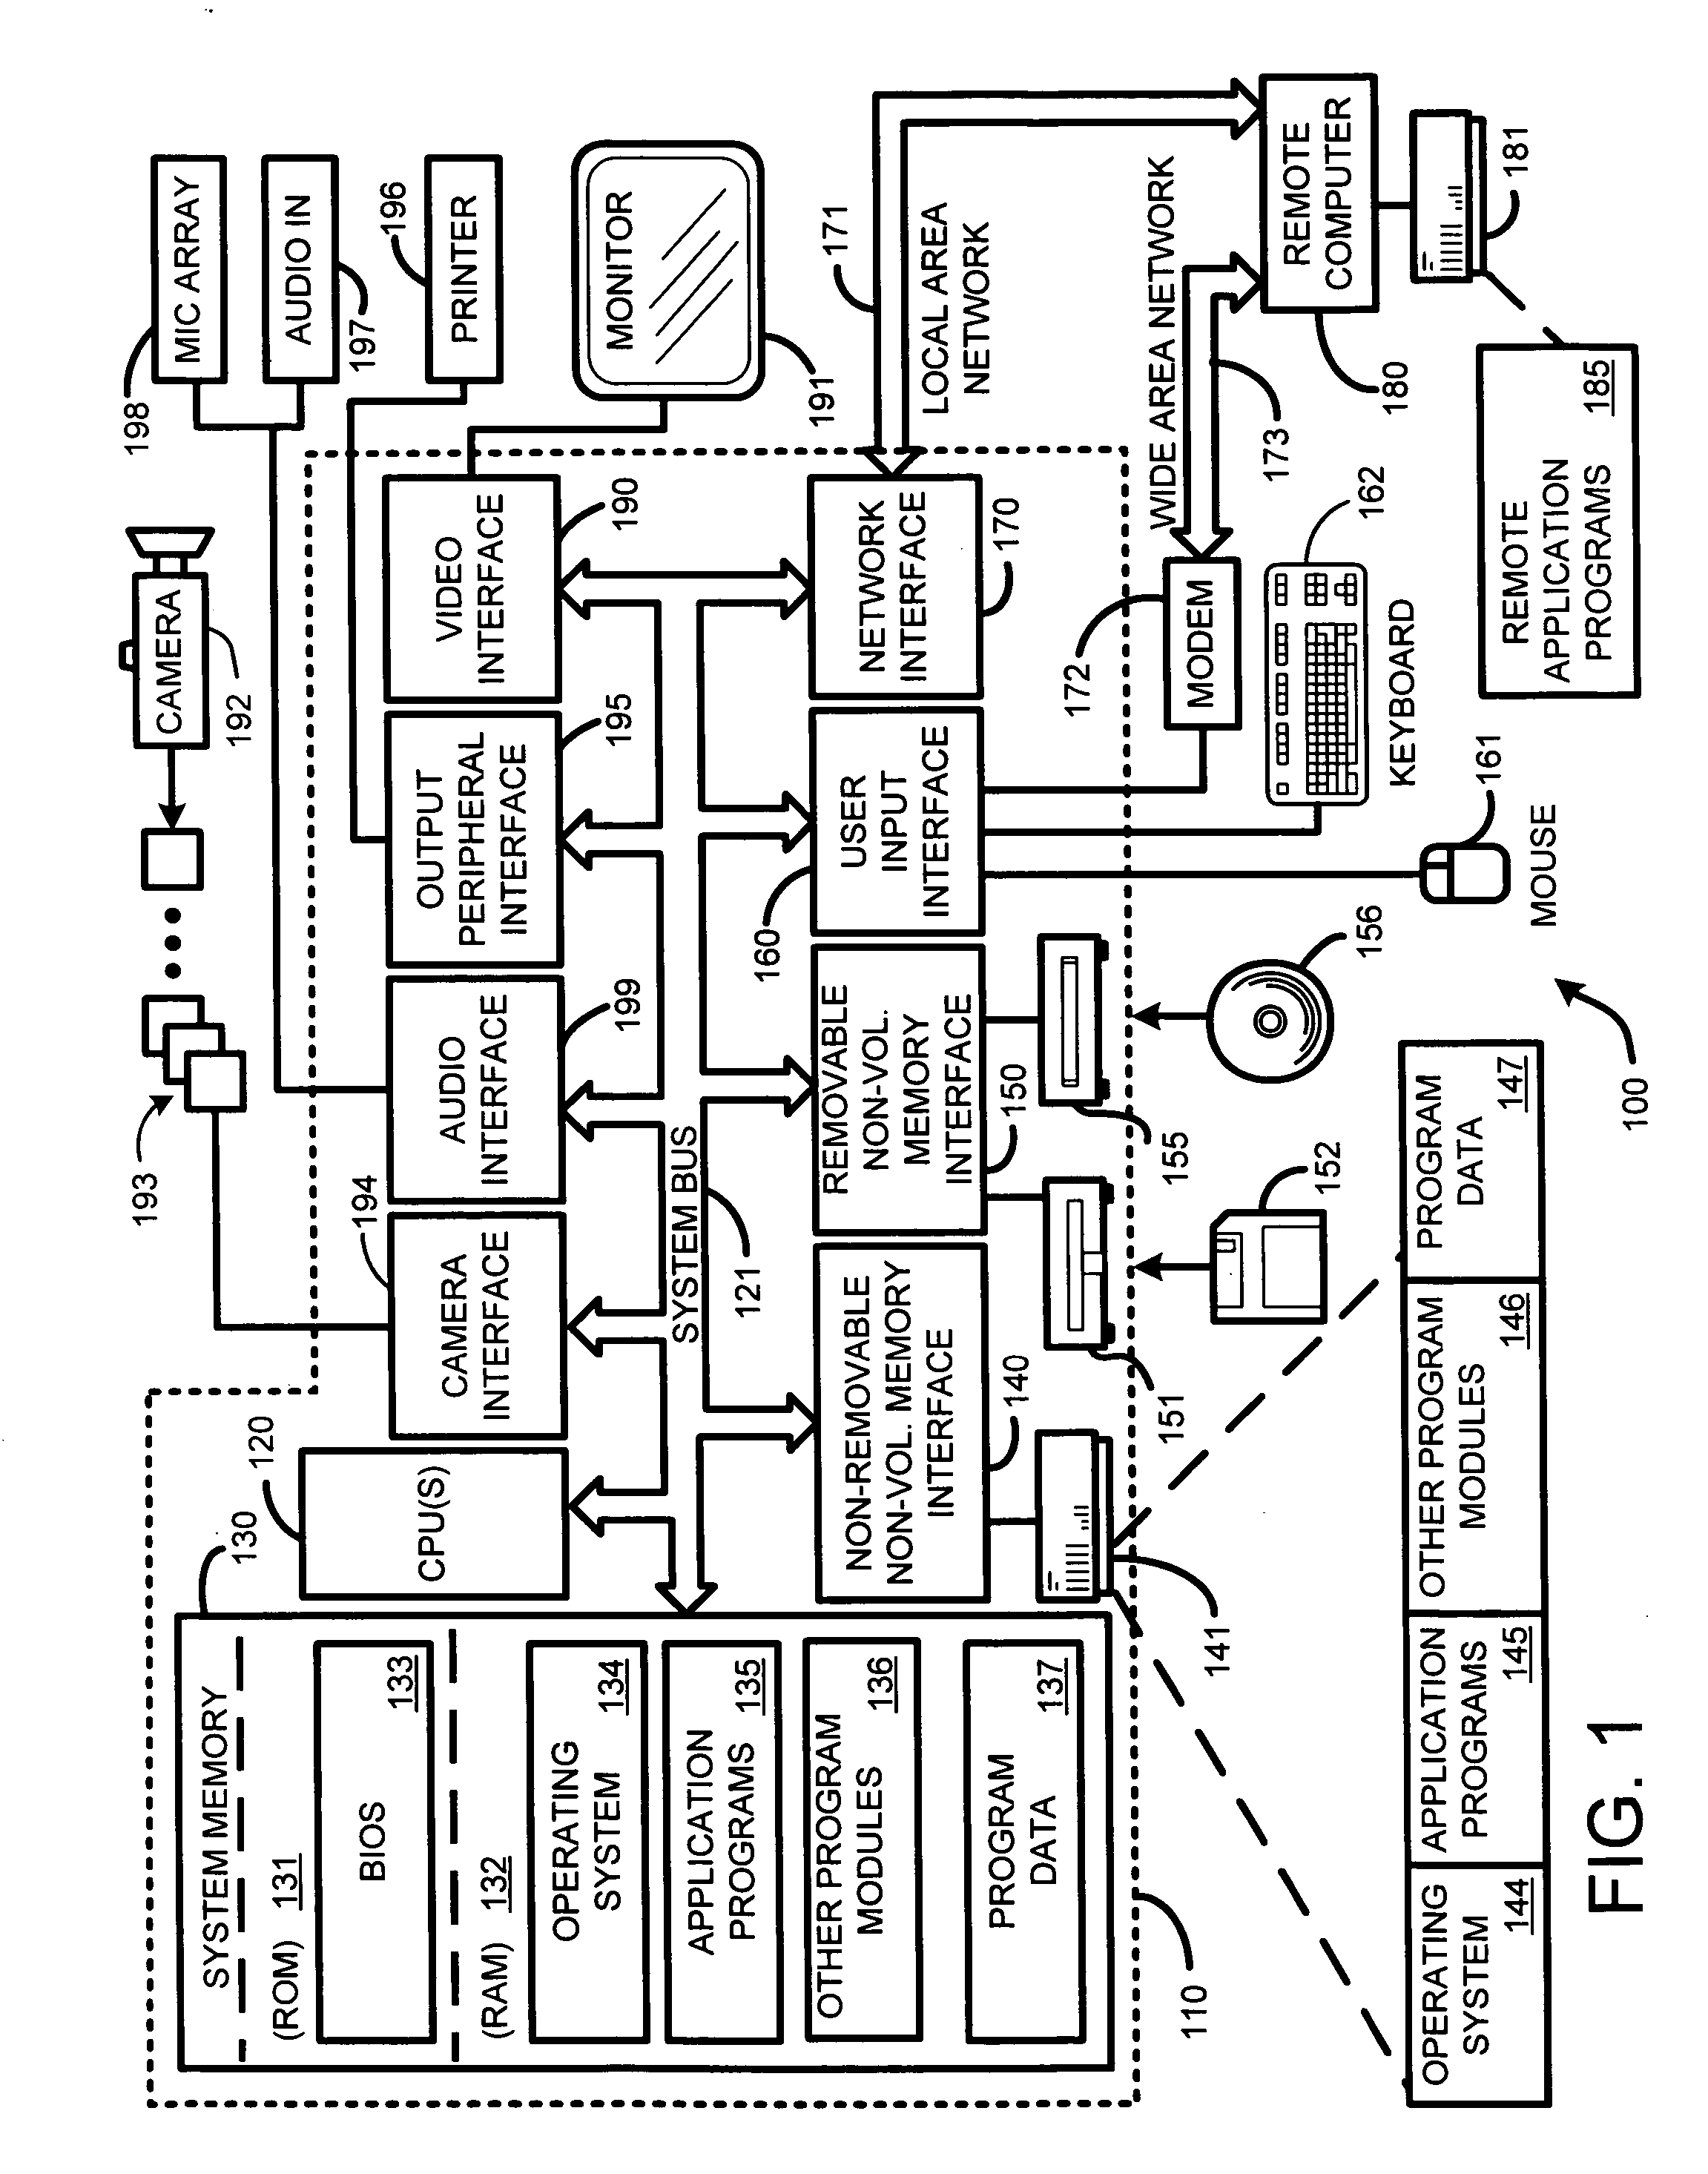 System and method for automatically customizing a buffered media stream